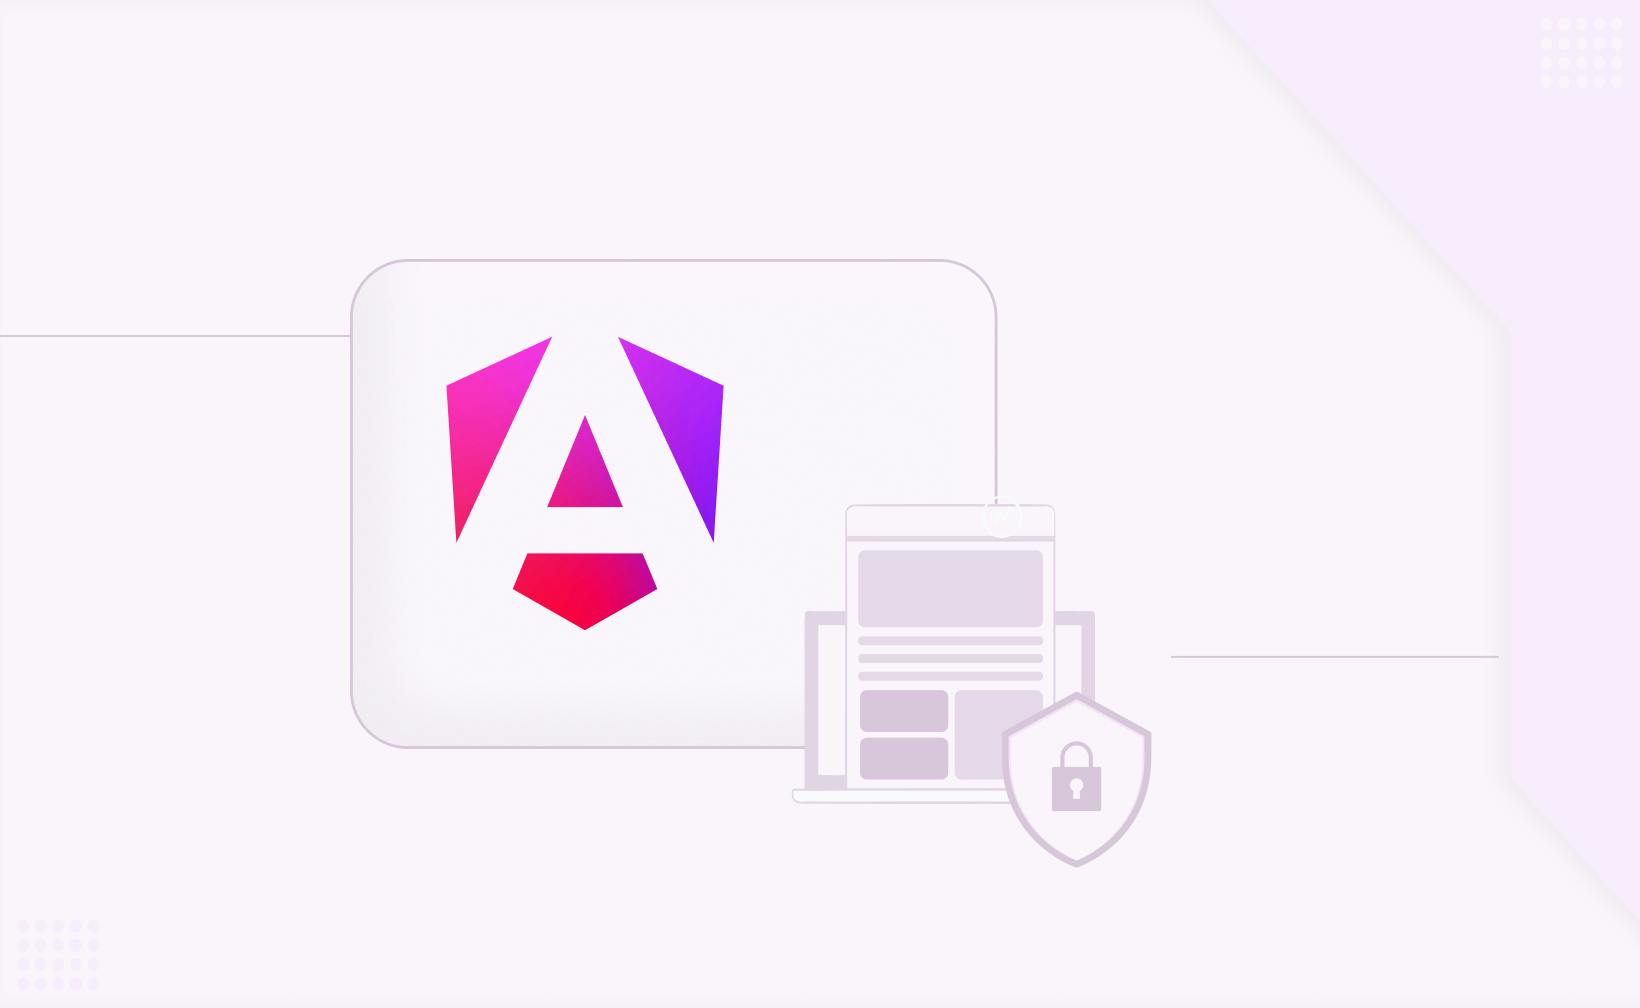 Implementing Route Protection in Angular using CanActivate guard